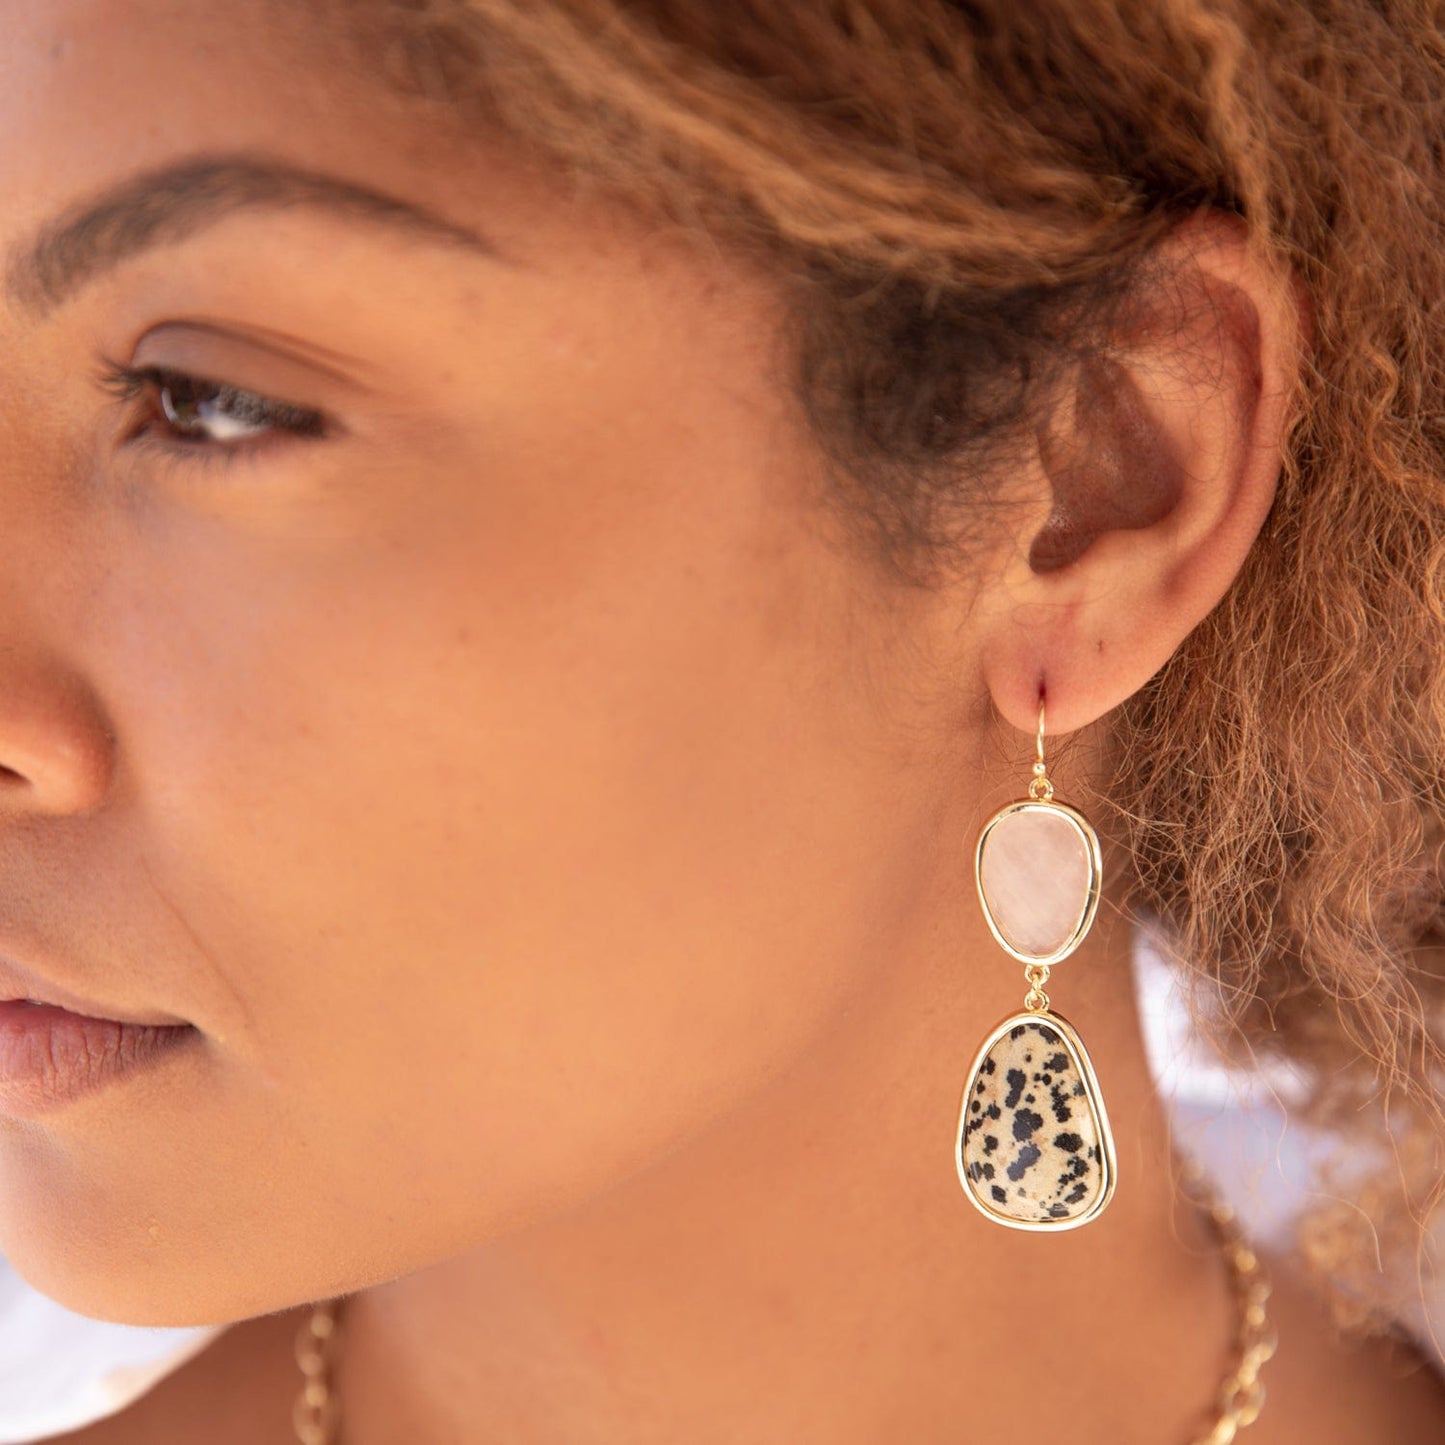 "Spotted and Smokey" Dalmatian Earrings